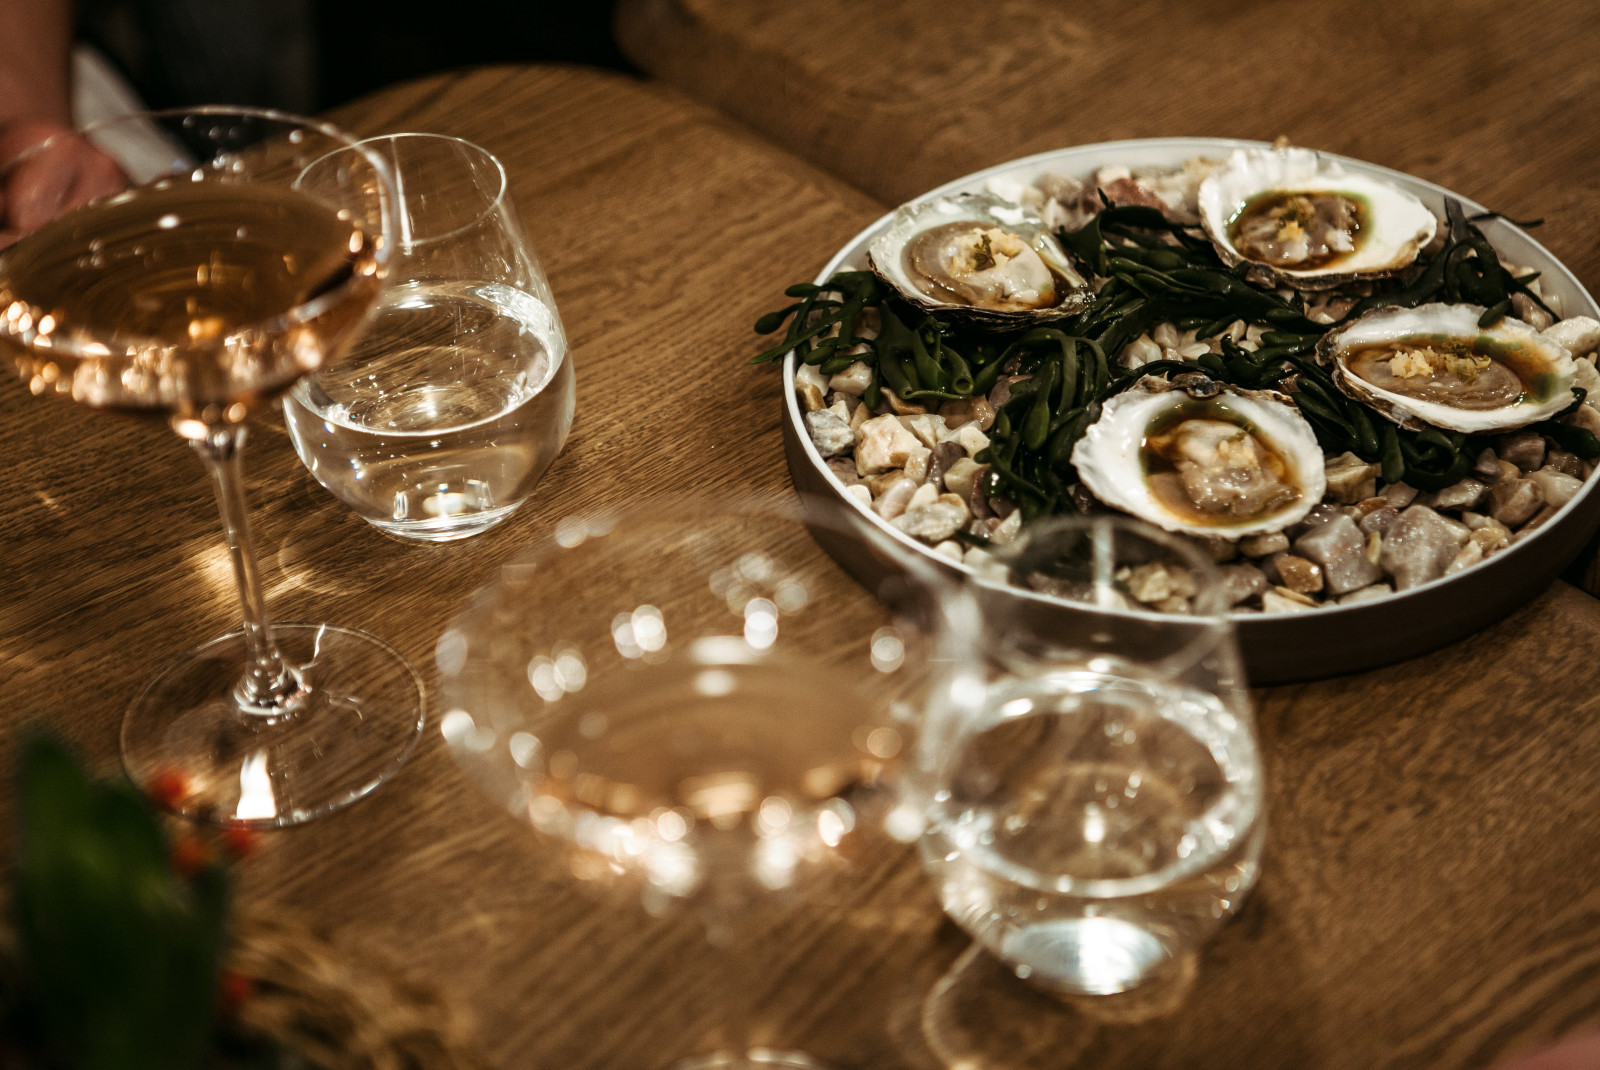 Oysters and cocktails in Boston, Massachusets